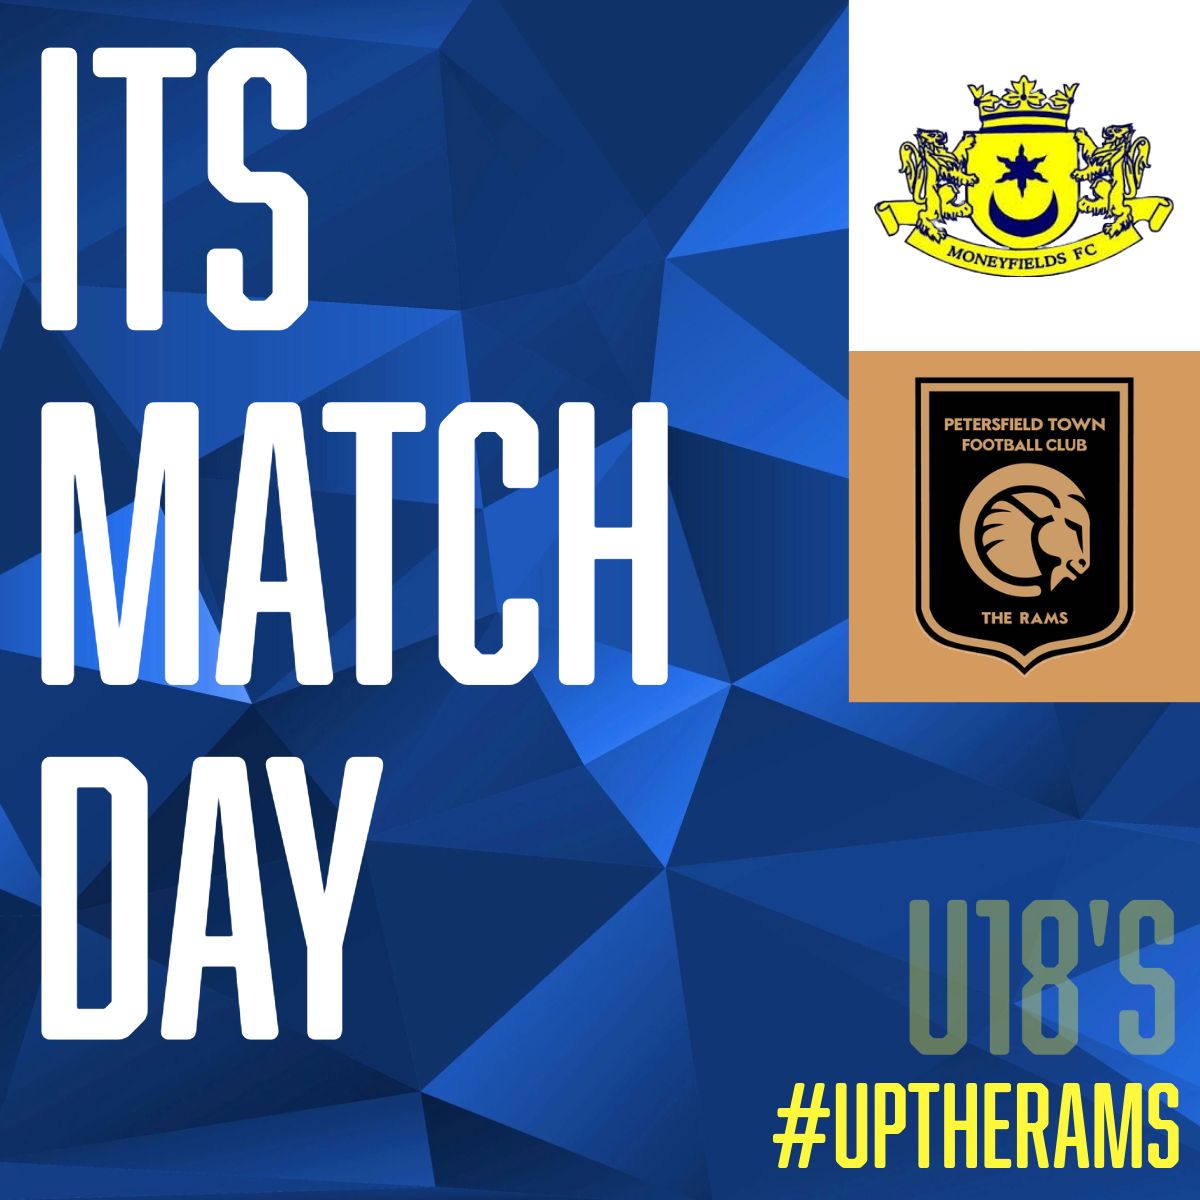 📆 | 𝙄𝙏𝙎 𝙈𝘼𝙏𝘾𝙃 𝘿𝘼𝙔 

The ladies welcome Farnborough to Love Lane (outside pitches), the U18's travel to take on Moneyfields U18's. Both 2pm KO. 

#uptherams